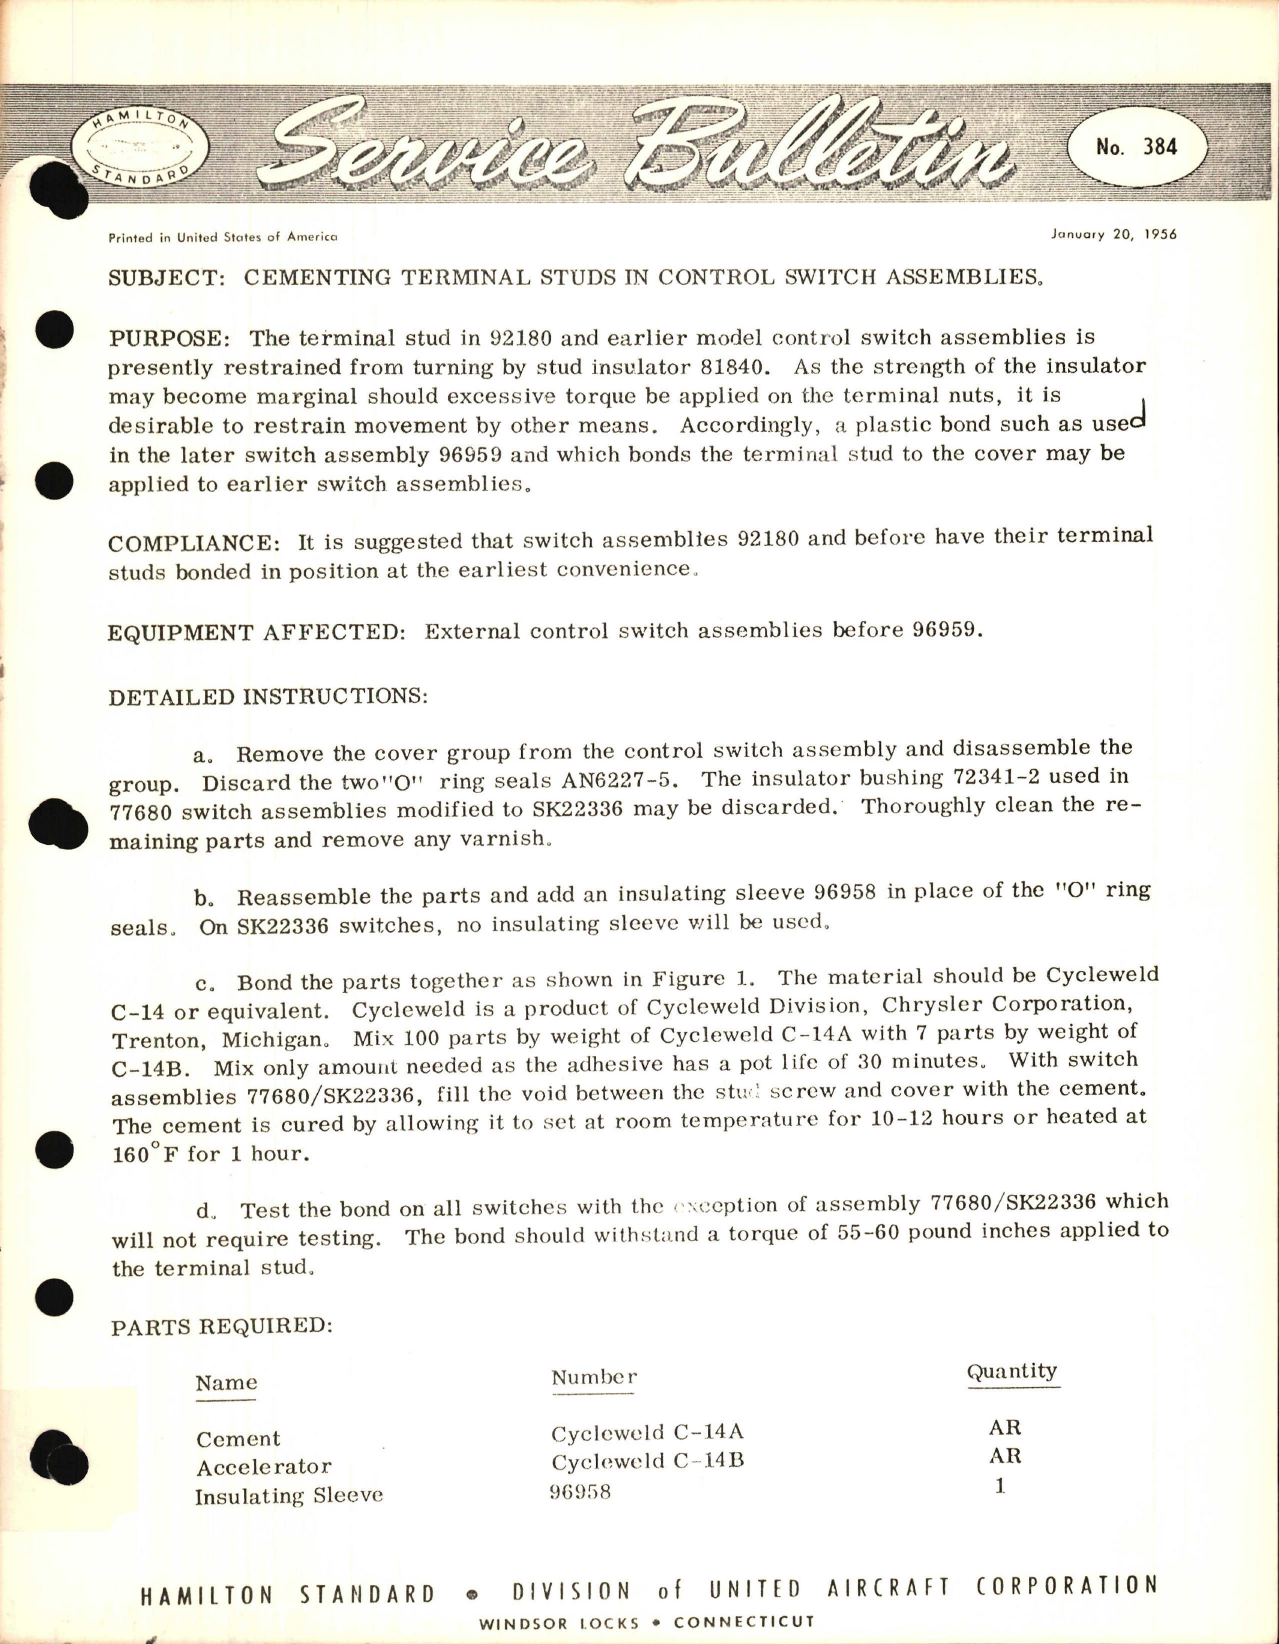 Sample page 1 from AirCorps Library document: Cementing Terminal Studs in Control Switch Assemblies